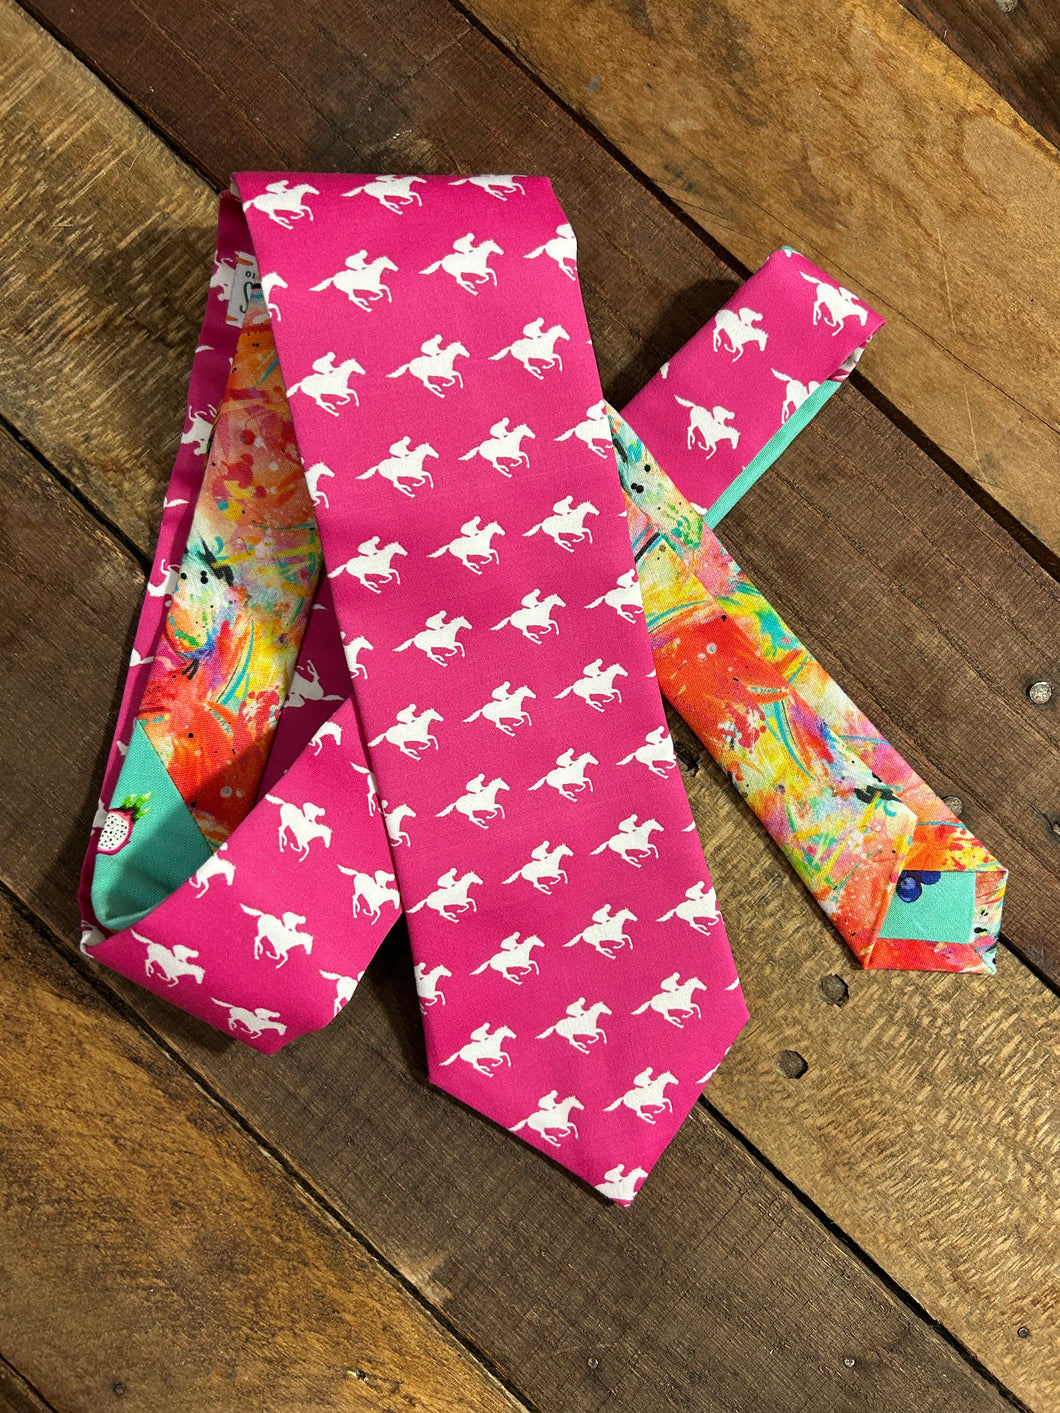 Hot Pink and White Horses Necktie